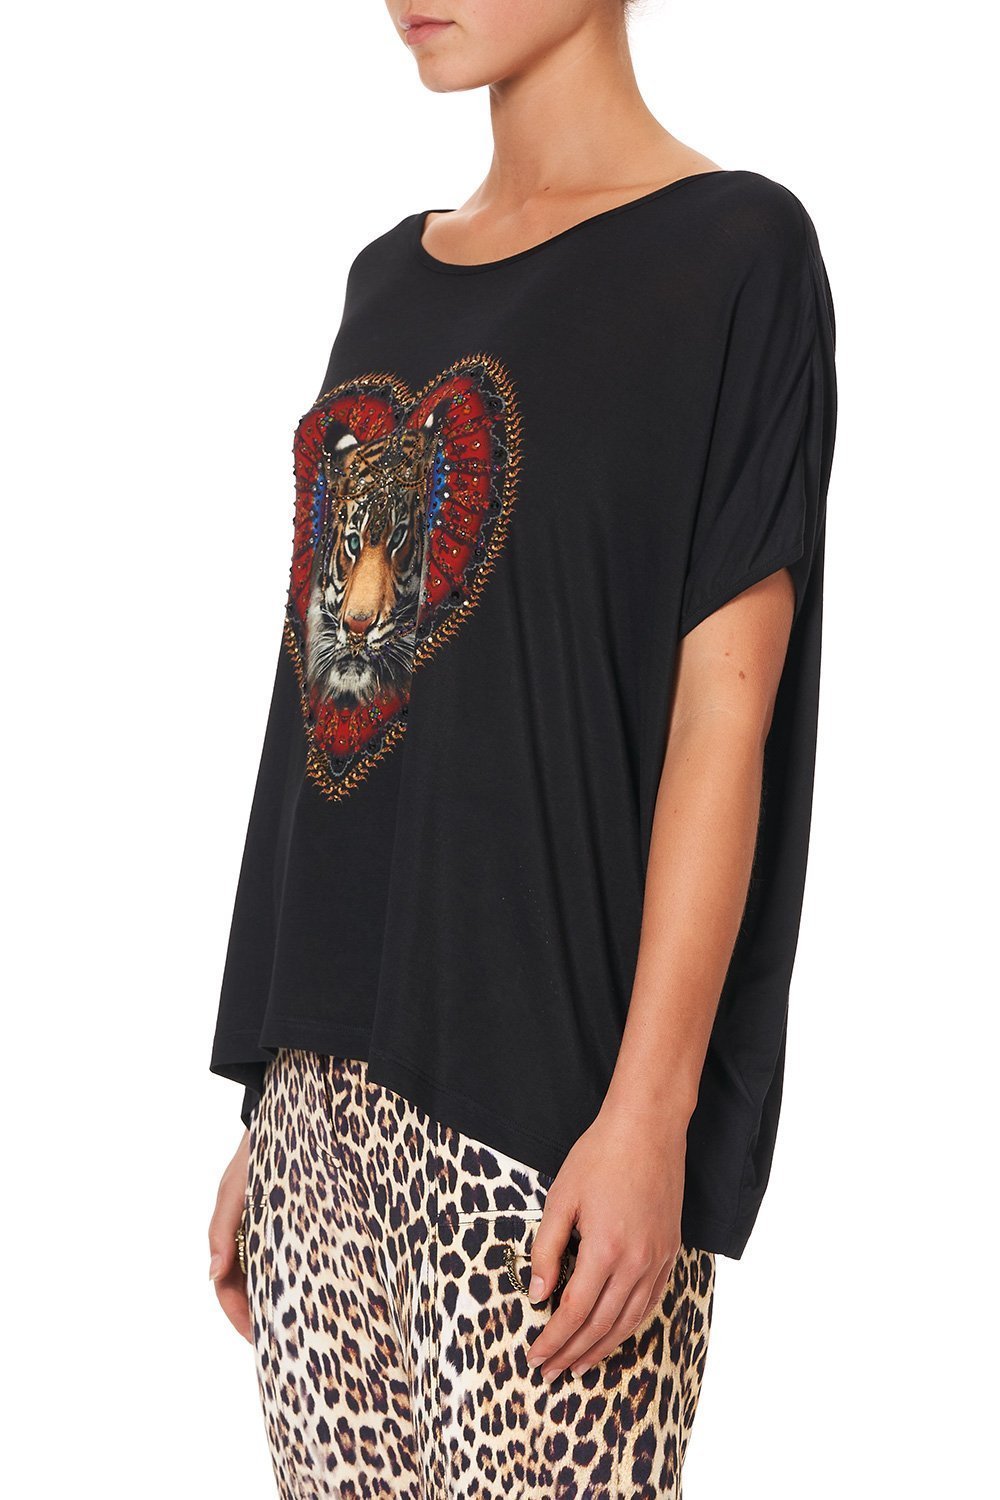 LOOSE FIT ROUND NECK TEE MIDNIGHT MADNESS